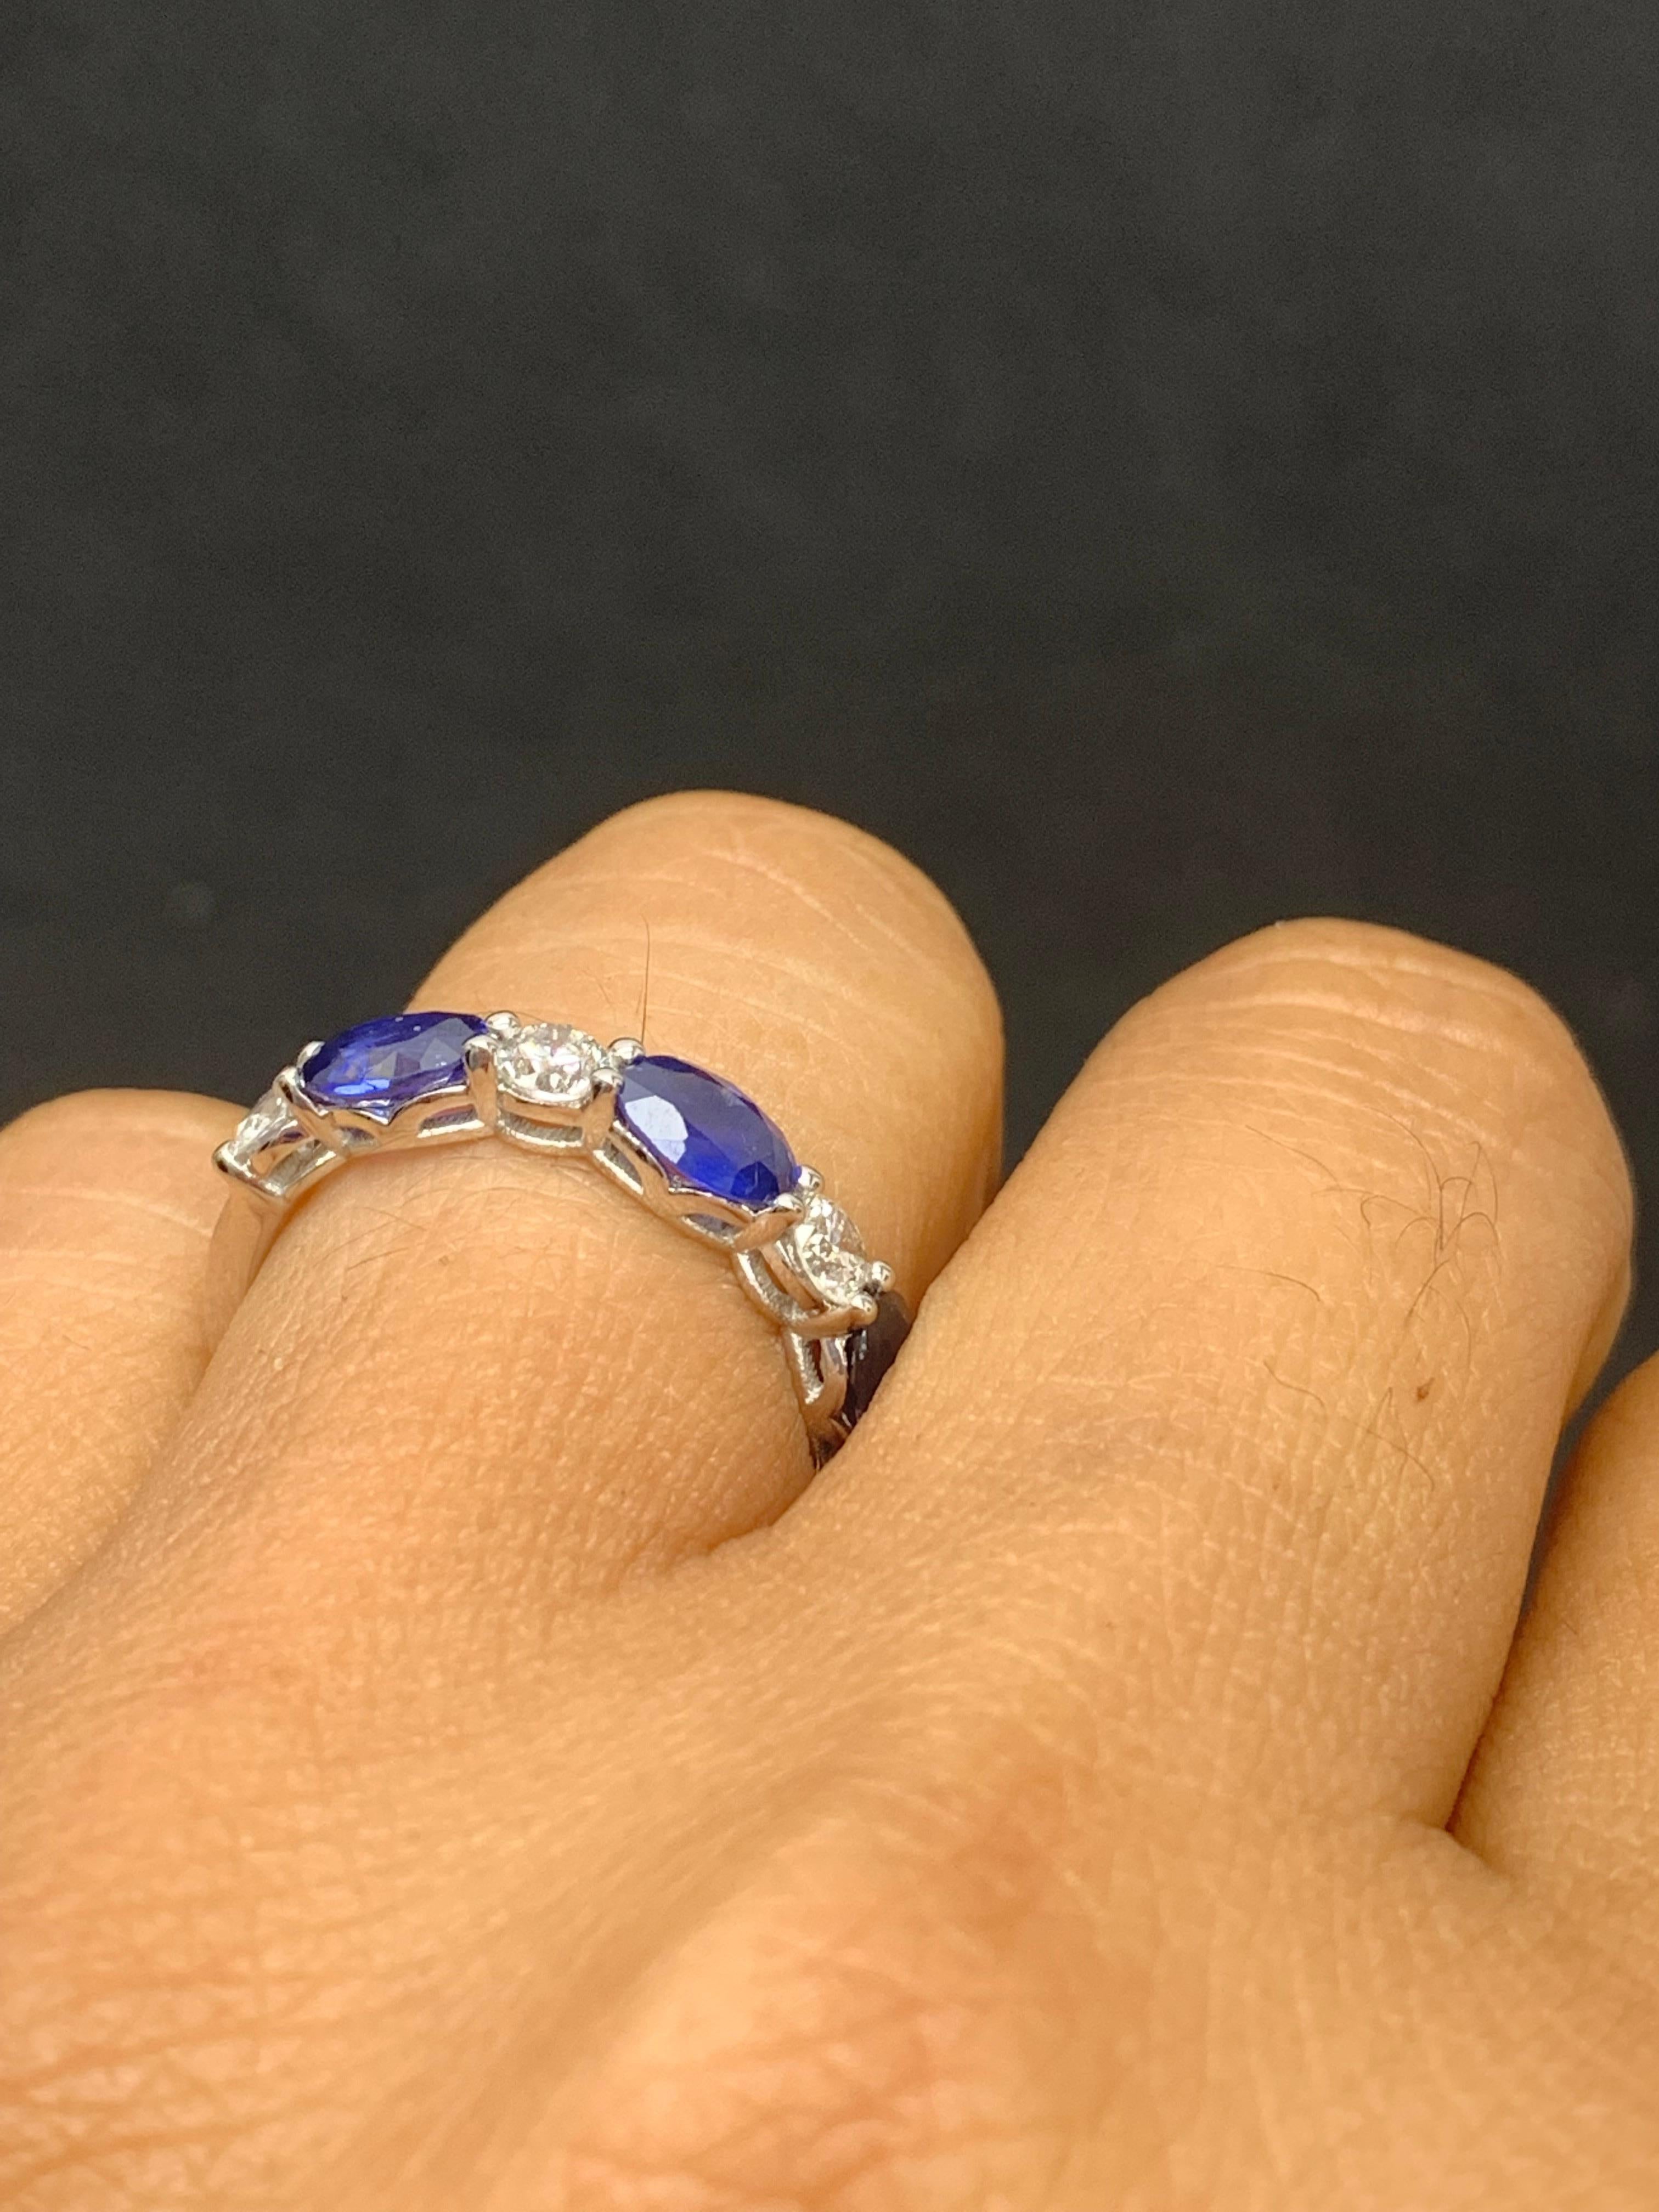 1.62 Carat Oval Cut Sapphire and Diamond Band in 14K White Gold For Sale 2